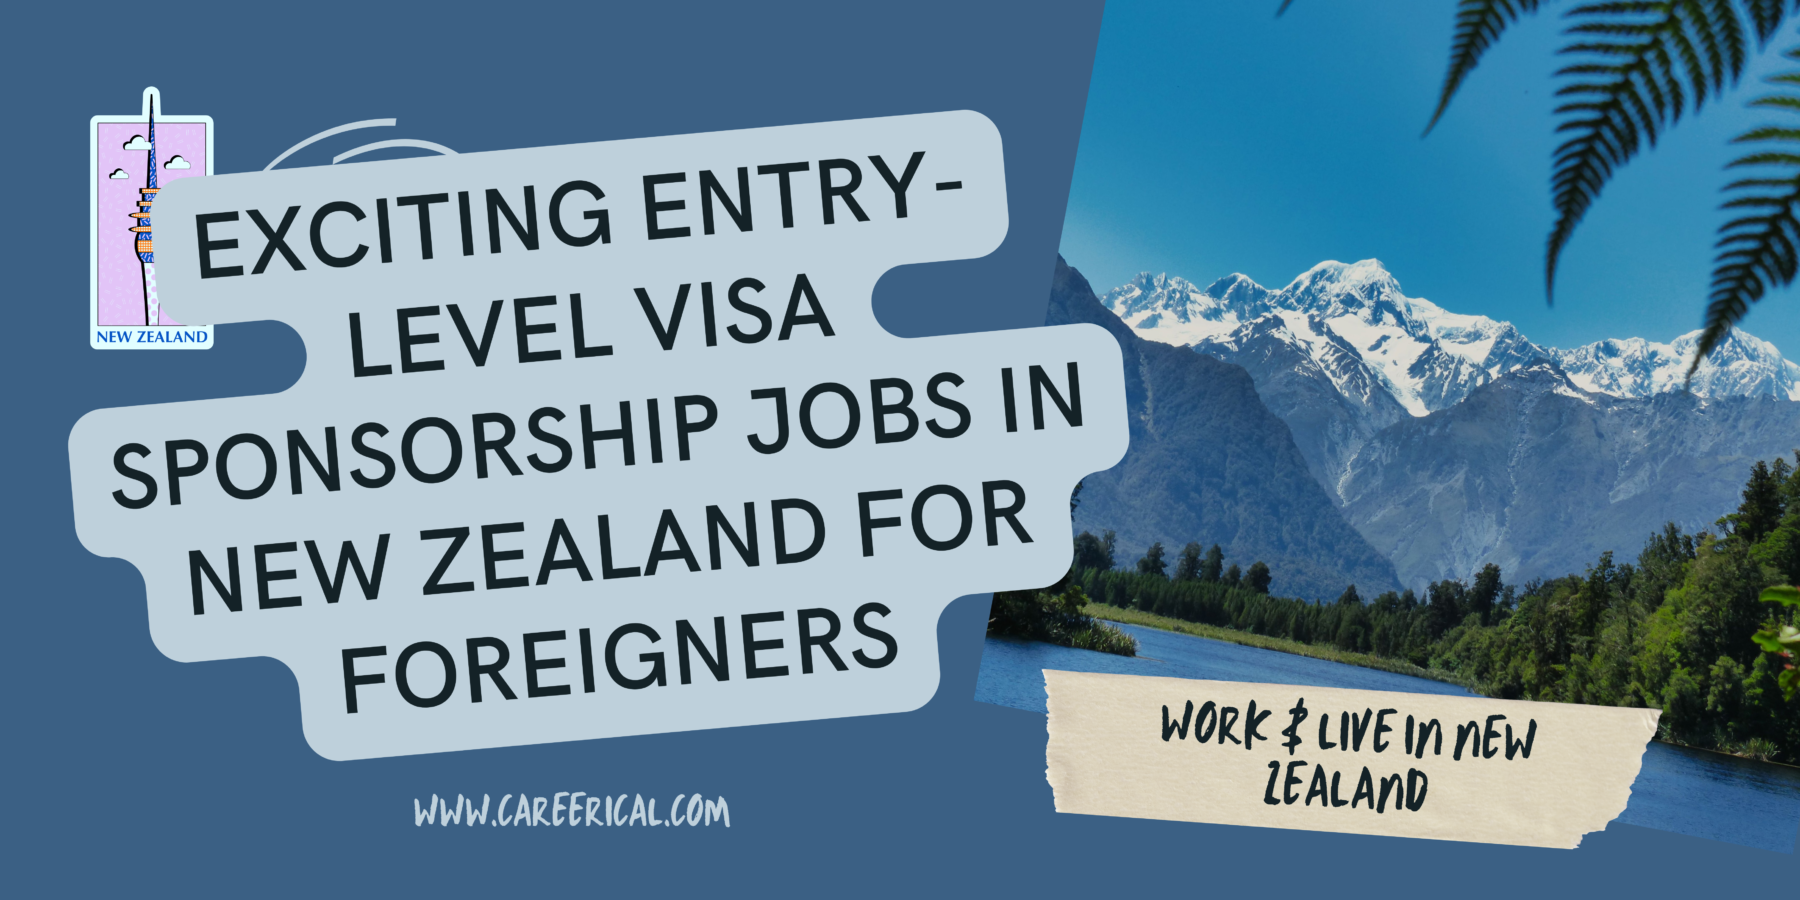 Exciting Entry-Level Visa Sponsorship Jobs in New Zealand for Foreigners